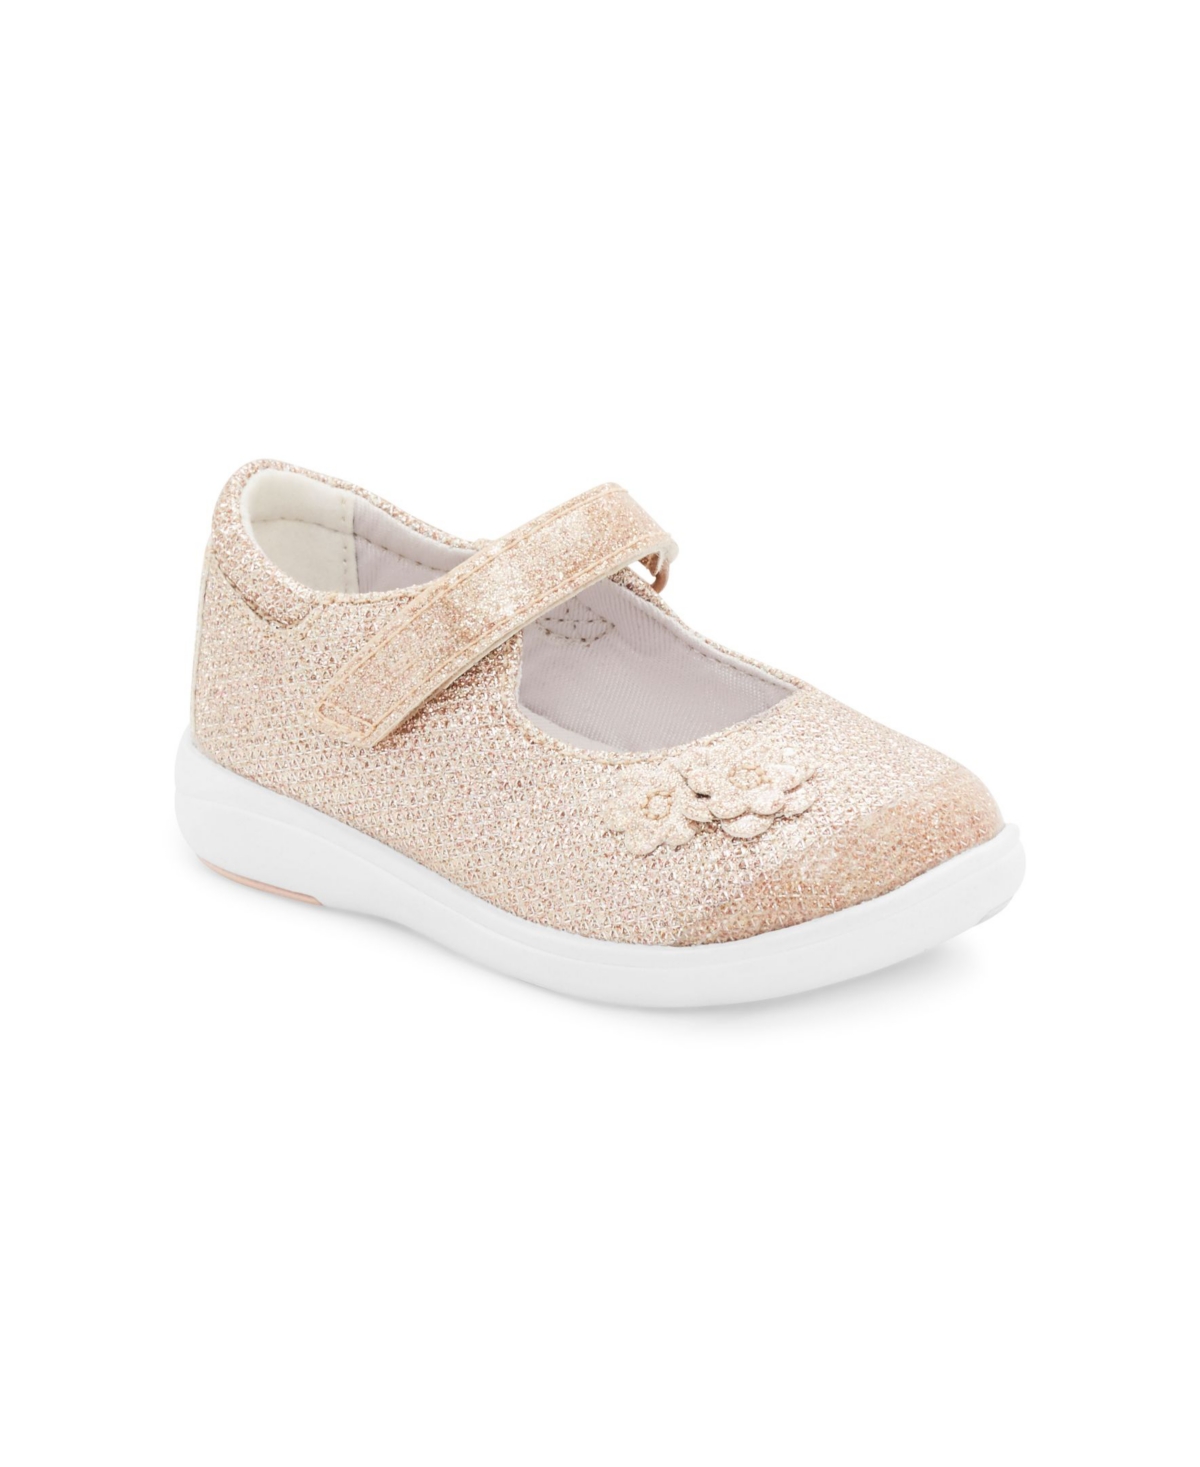 Stride Rite Toddler Girls Holly Mary Jane Shoes In Rose Gold